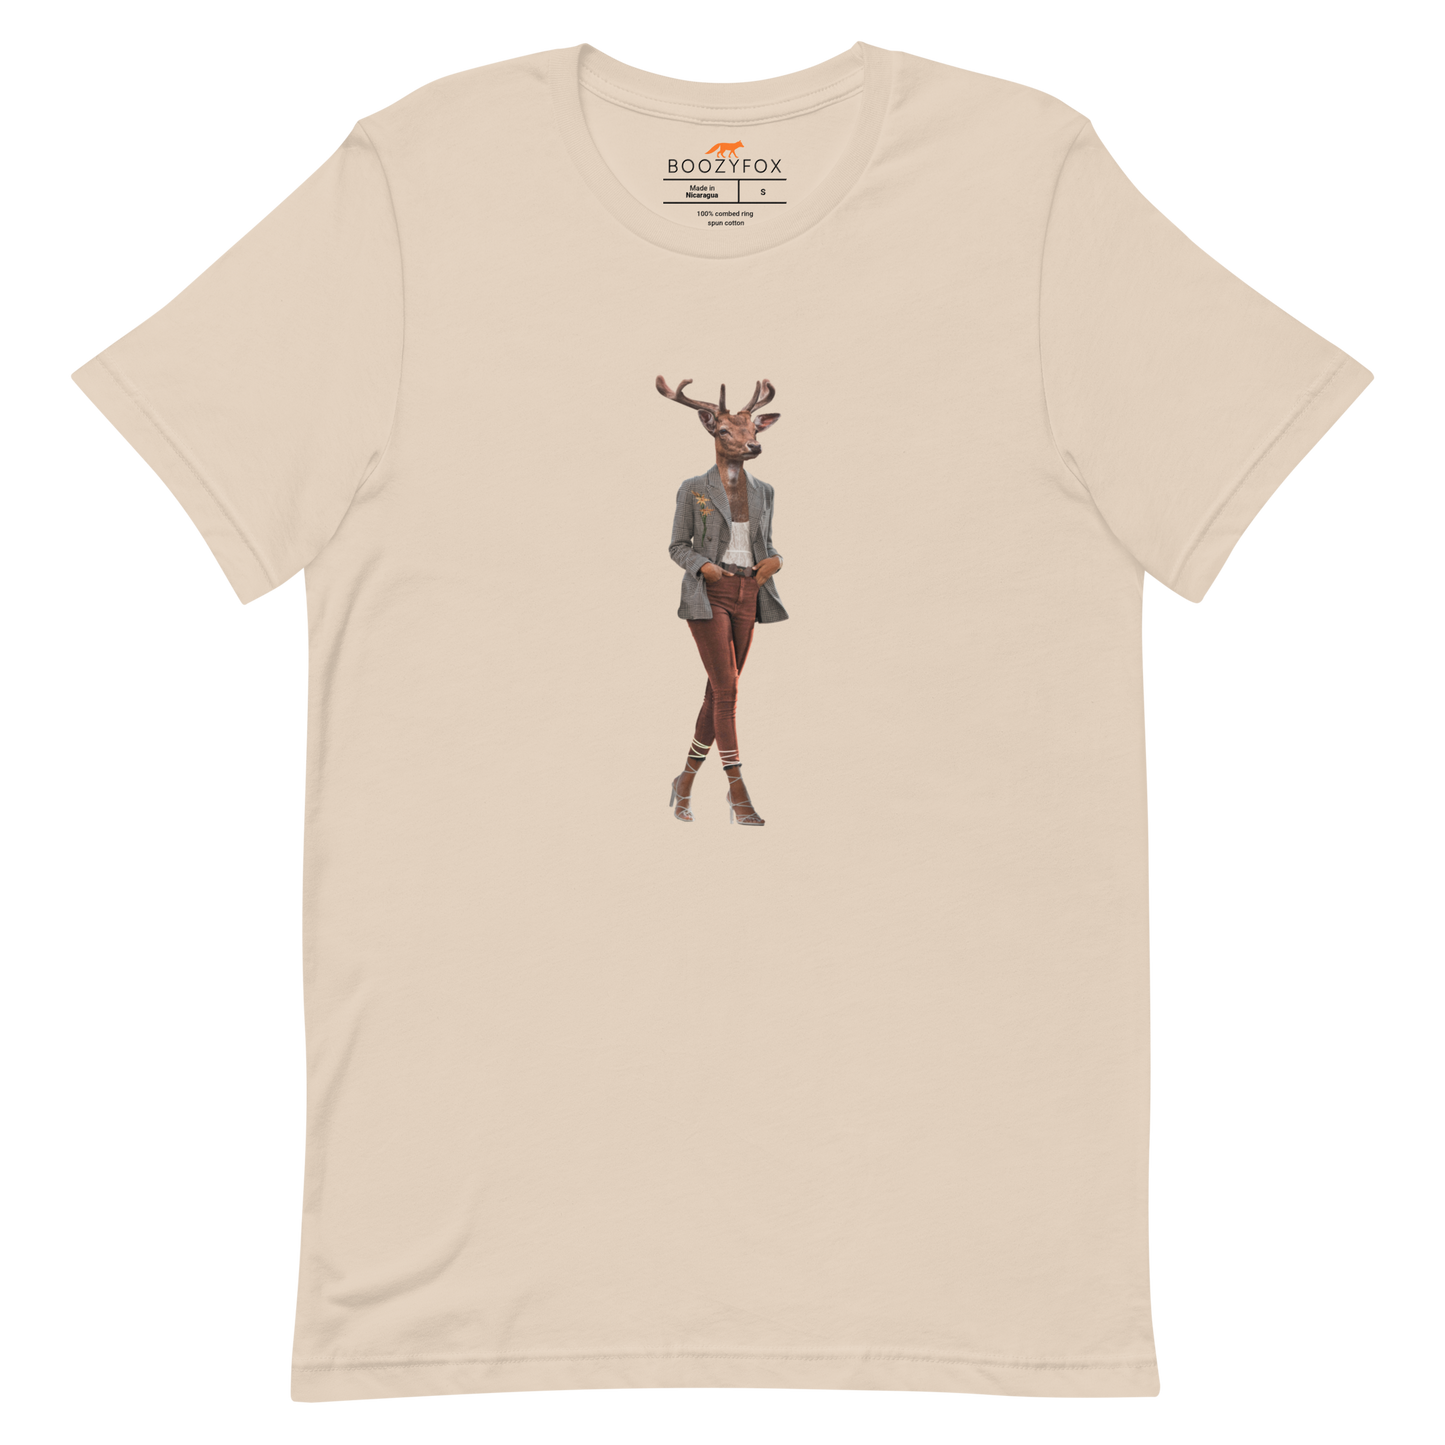 Soft Cream Premium Deer T-Shirt featuring an Anthropomorphic Deer graphic on the chest - Funny Graphic Deer Tees - Boozy Fox